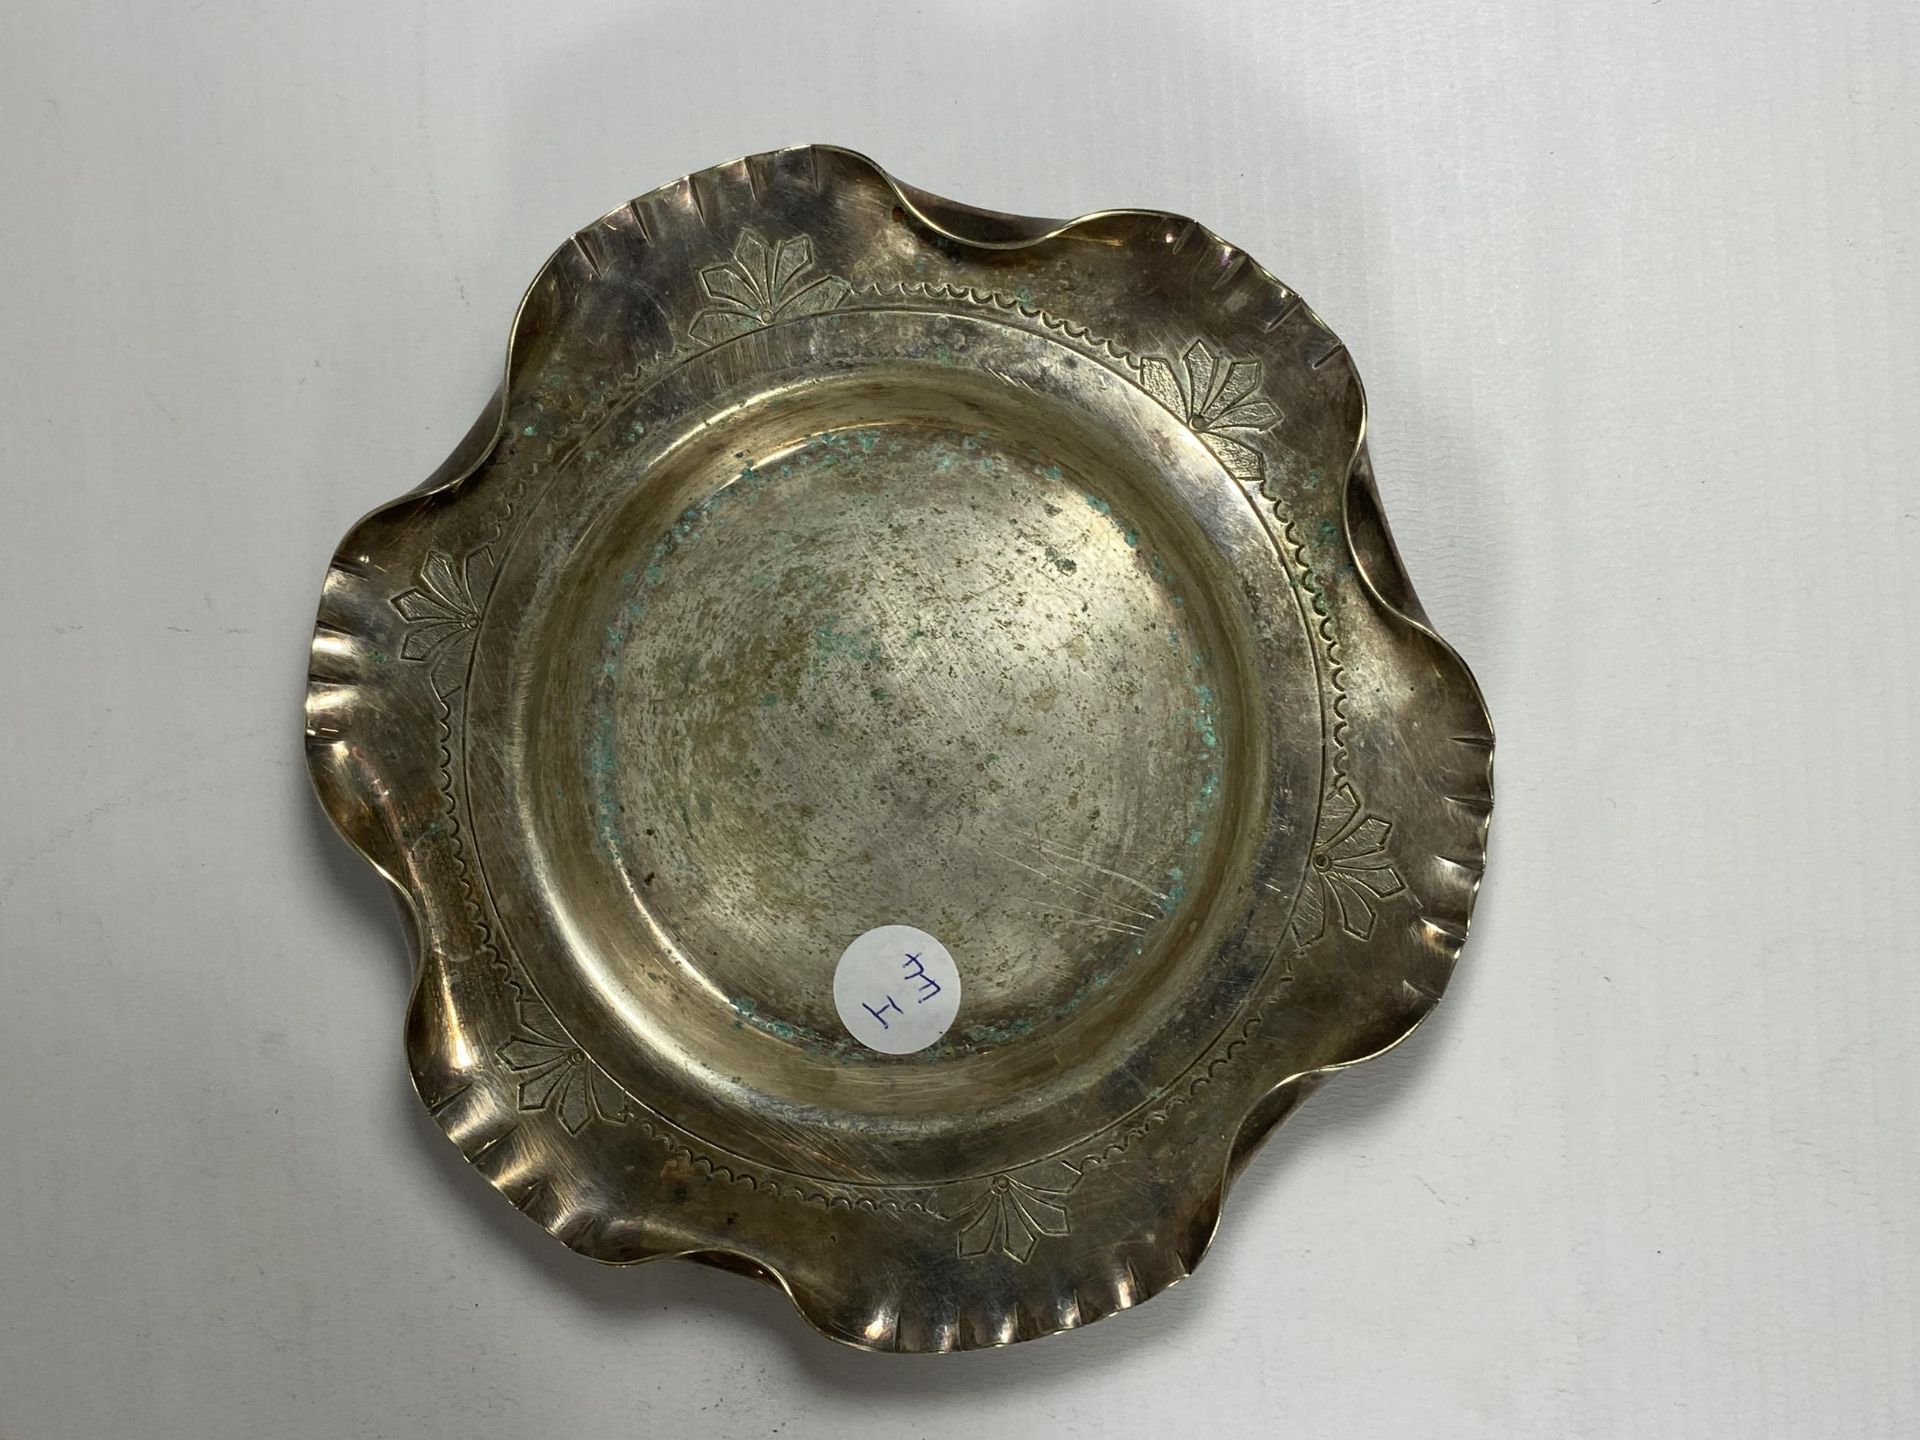 TWO VINTAGE SILVER PLATED ITEMS - PEDESTAL BOWL WITH PIERCED GALLERY DESIGN AND SMALLER DISH - Image 4 of 5